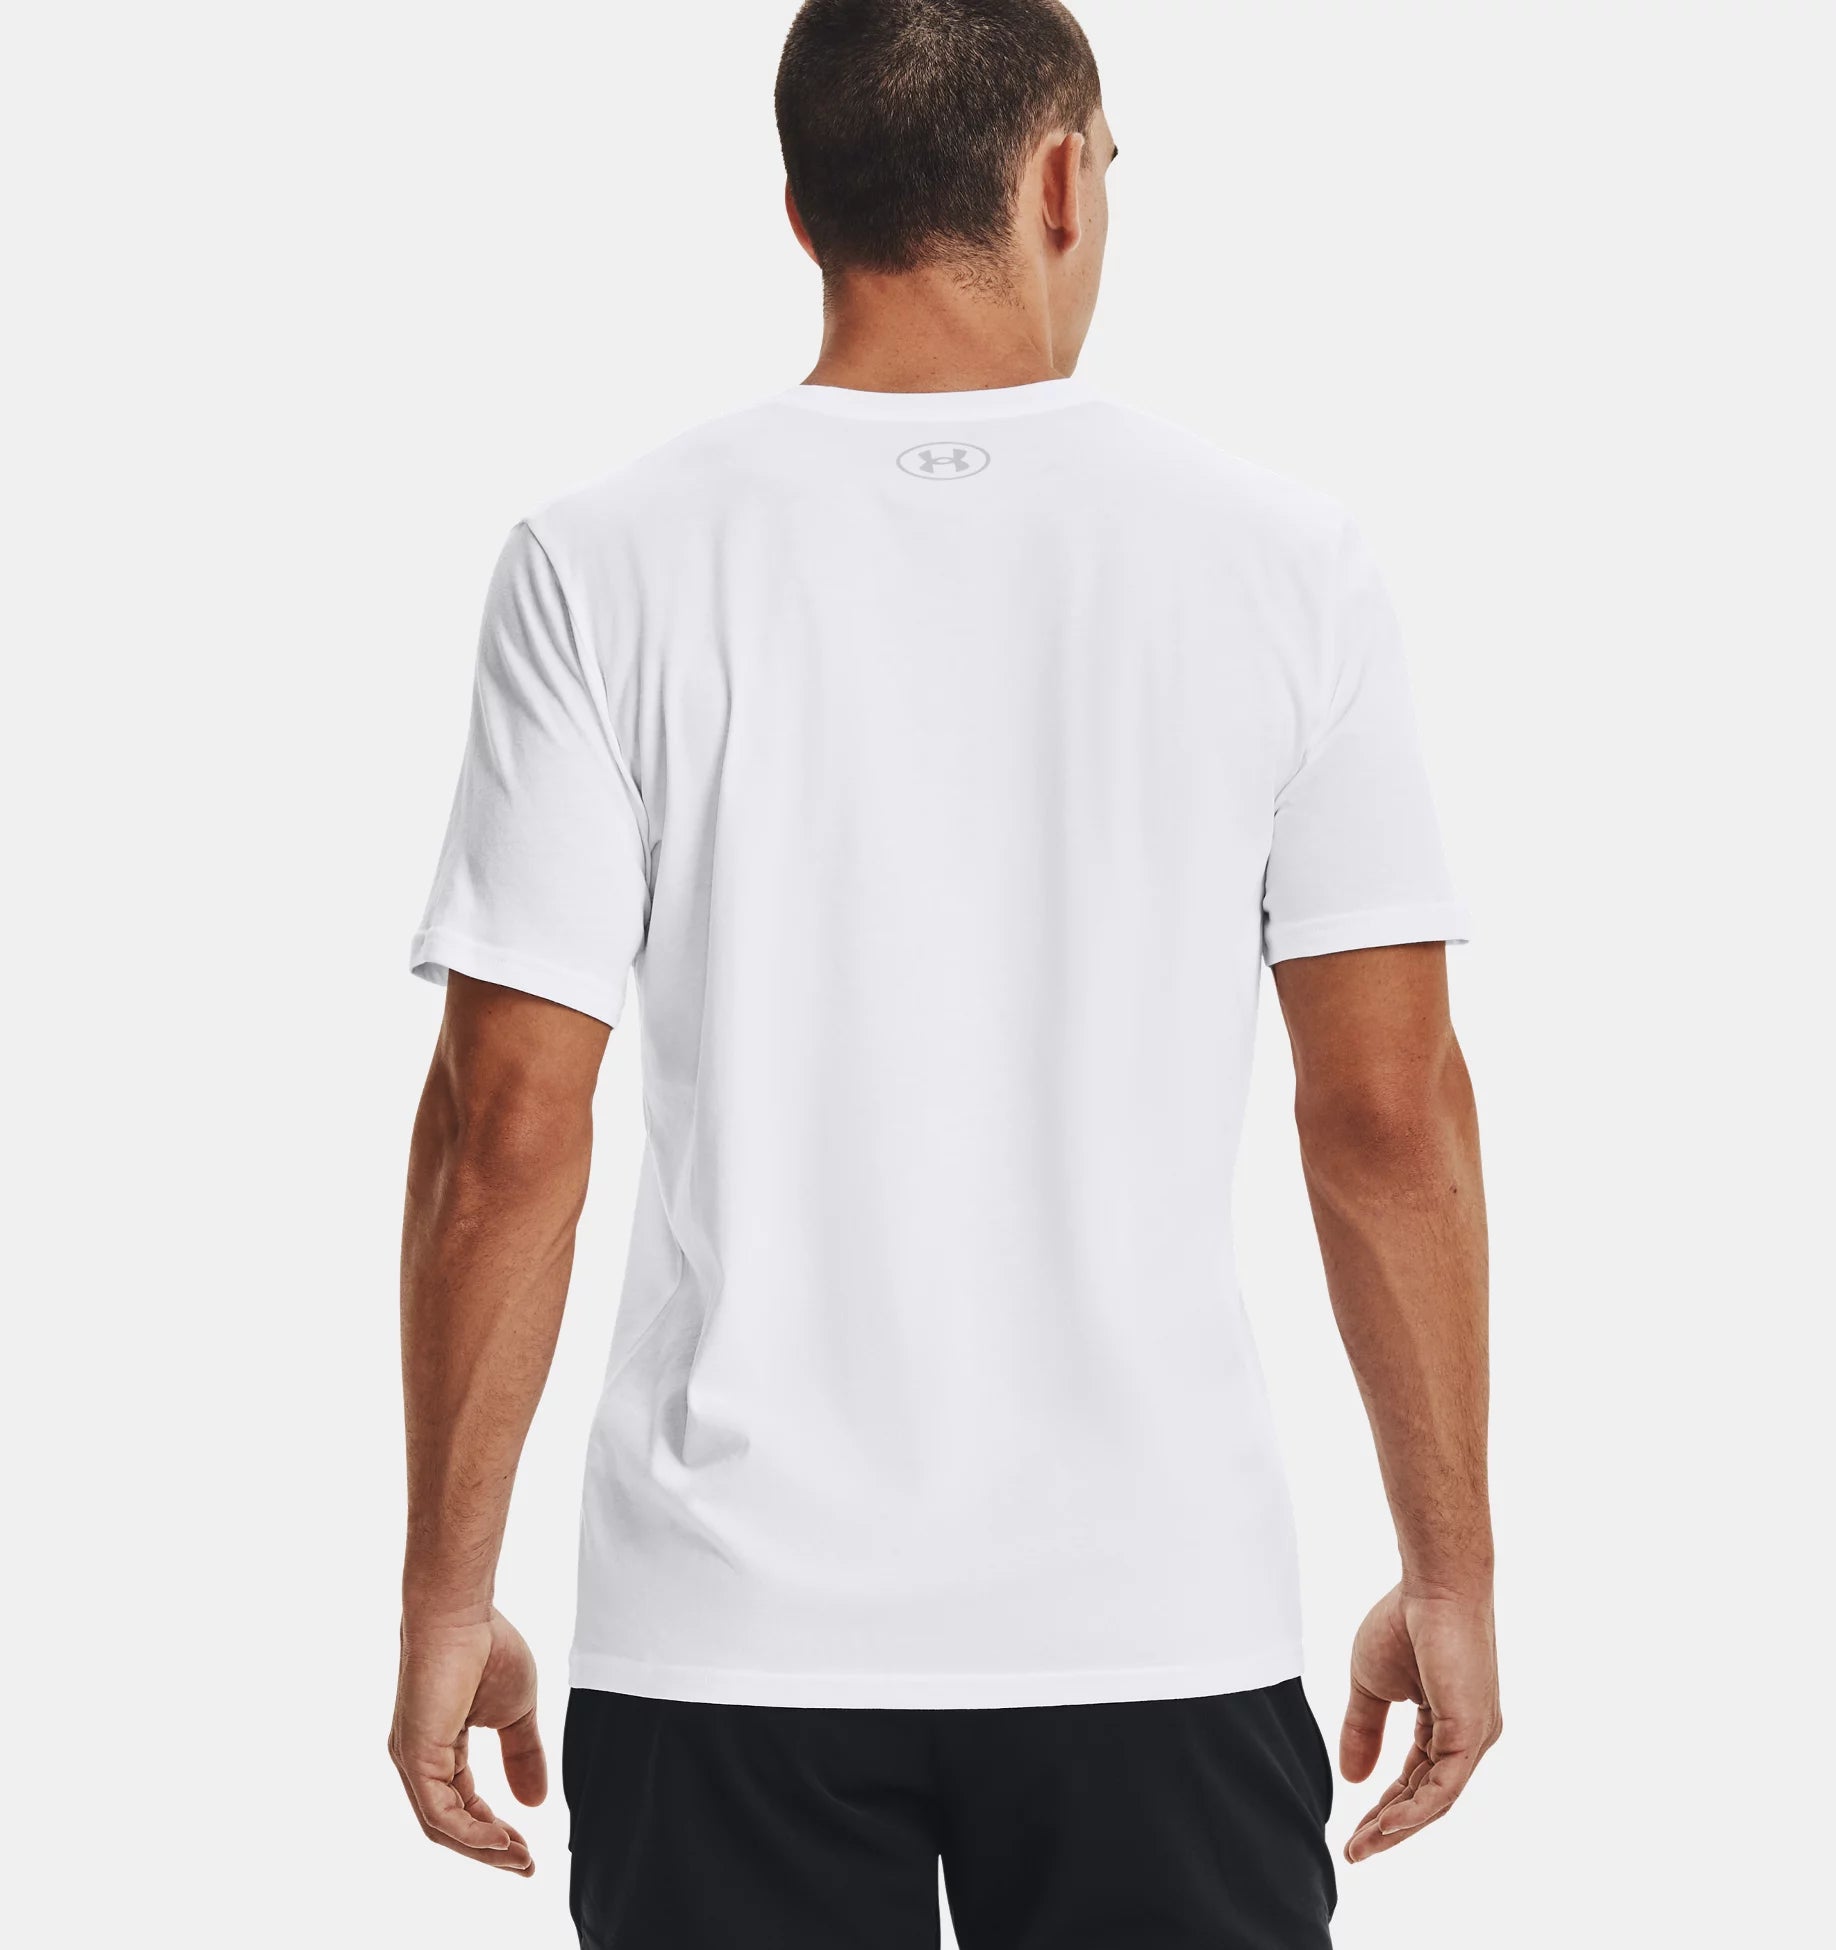 Under Armour Mens Sportstyle Logo T-Shirt Crew Neck Tee Top Short Sleeve  Loose